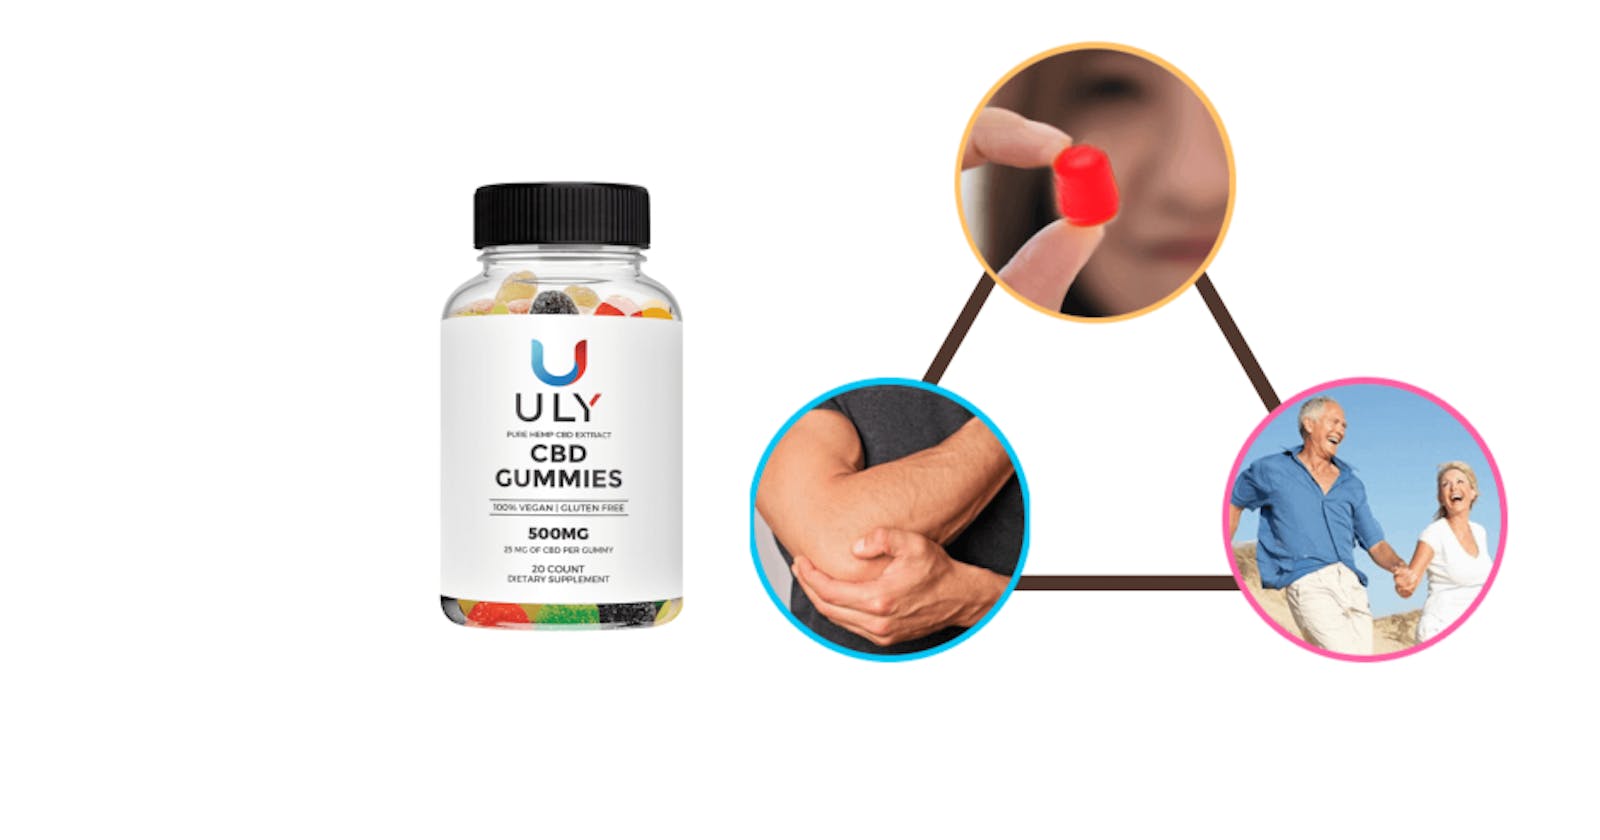 Uly CBD Gummies Reviews [Updated 2023]- Price for Sale & Website?